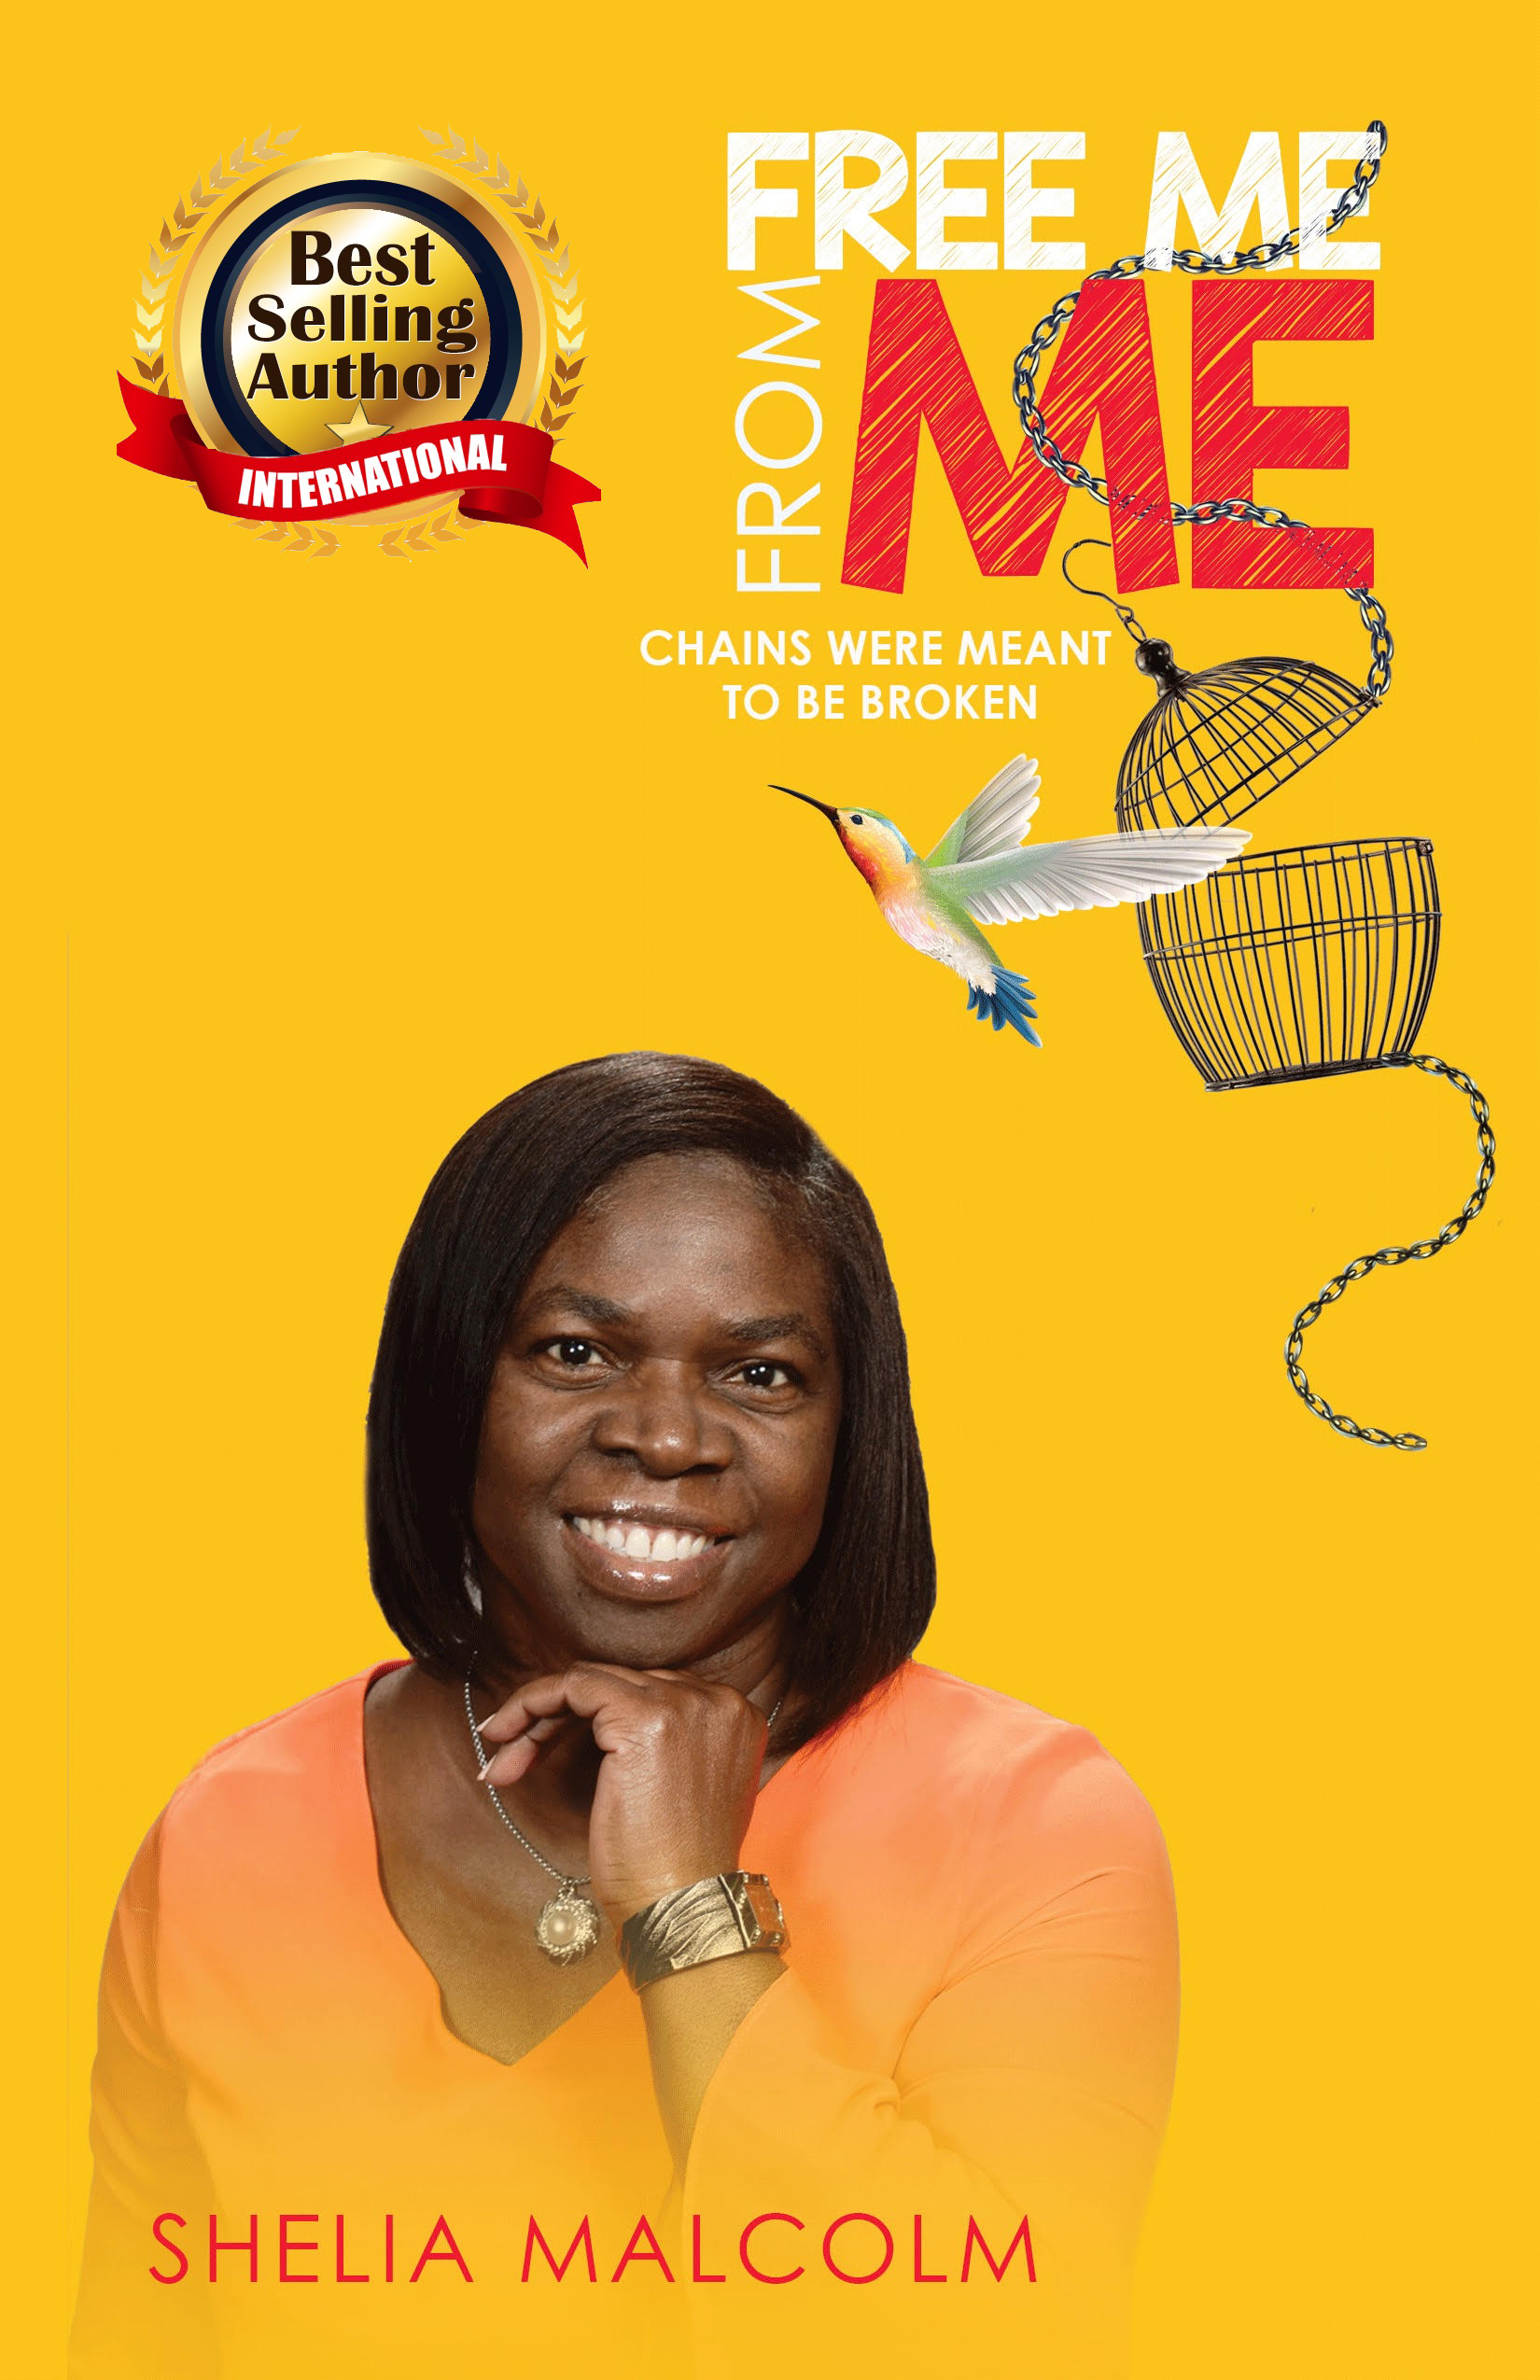 A bright yellow background with an image of Shelia toward the bottom. She's smiling with her hand up to her chin. At the top of the cover is a Best Selling Author International badge. In the top-right corner is the title FREE ME FROM ME CHAINS WERE MEANT TO BE BROKEN. A chain loops around the title and leads down to an open birdcage. A hummingbird is seen flying up and away.